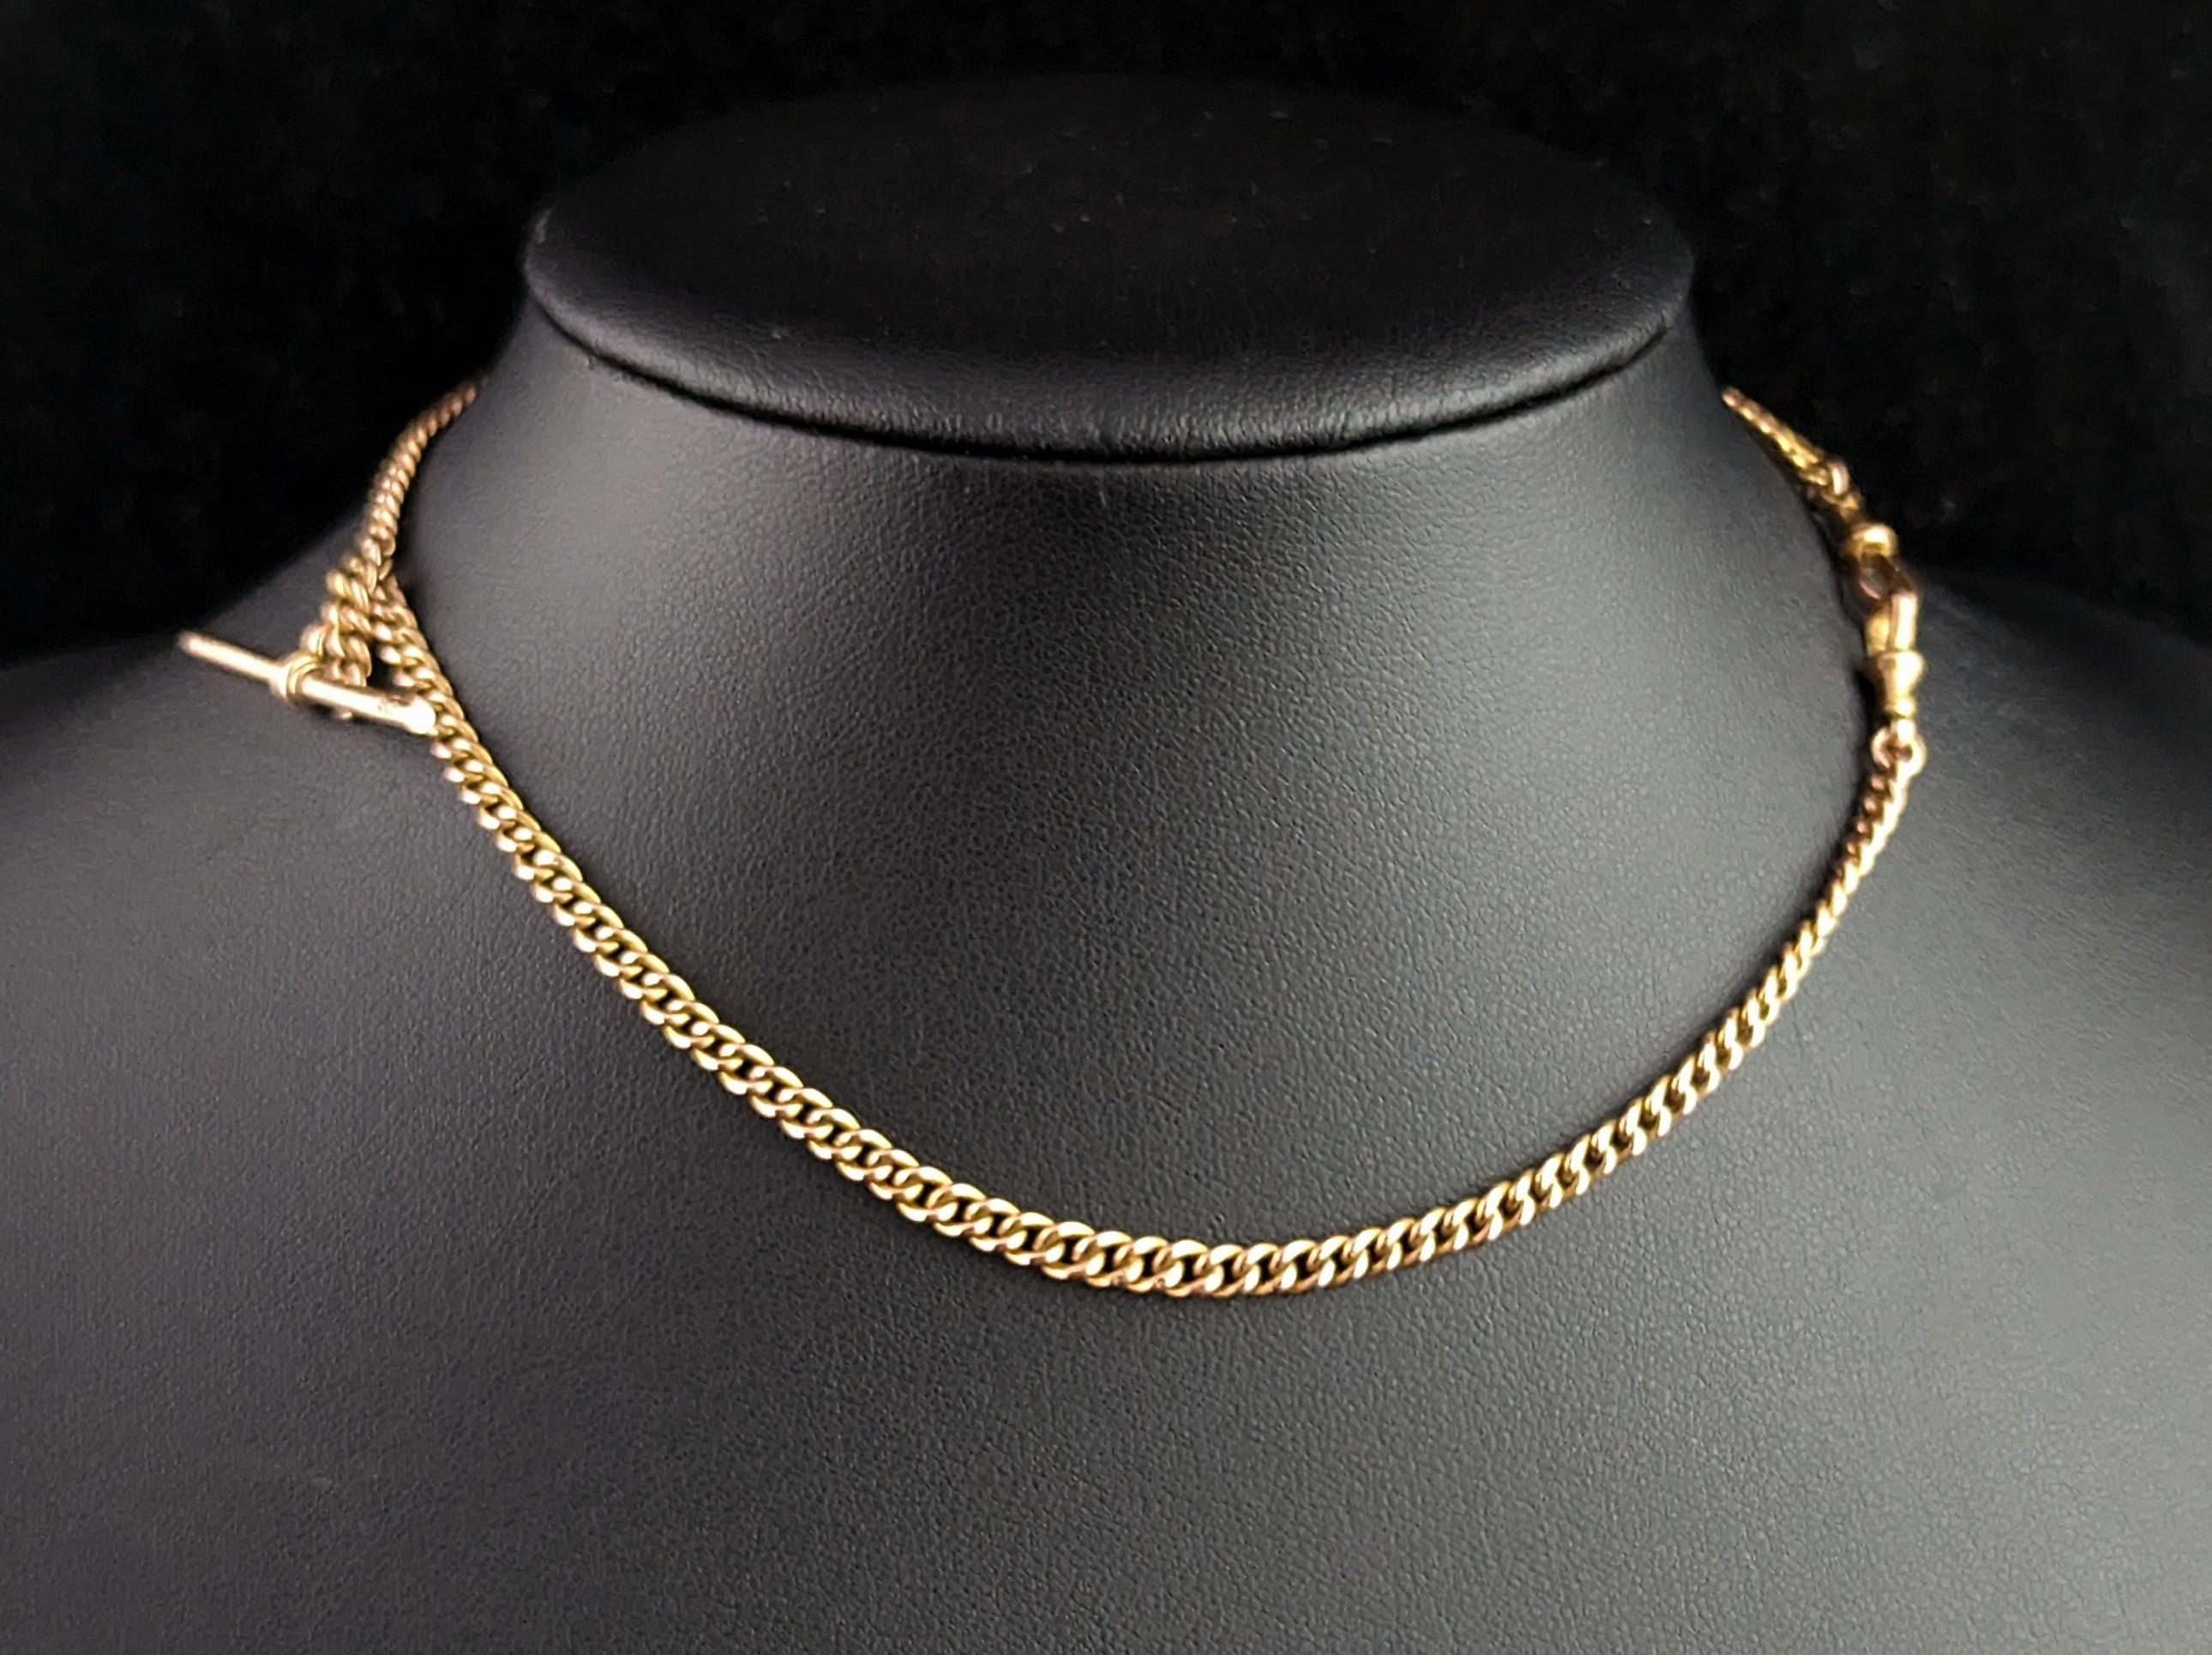 Ahh the classic gold Albert chain! Such a beautiful and versatile piece of jewellery and always highly sought after.

This is a shorter length Albert chain in a rich yellow gold with a tight curb link, early Art Deco era c1910s, it would have graced